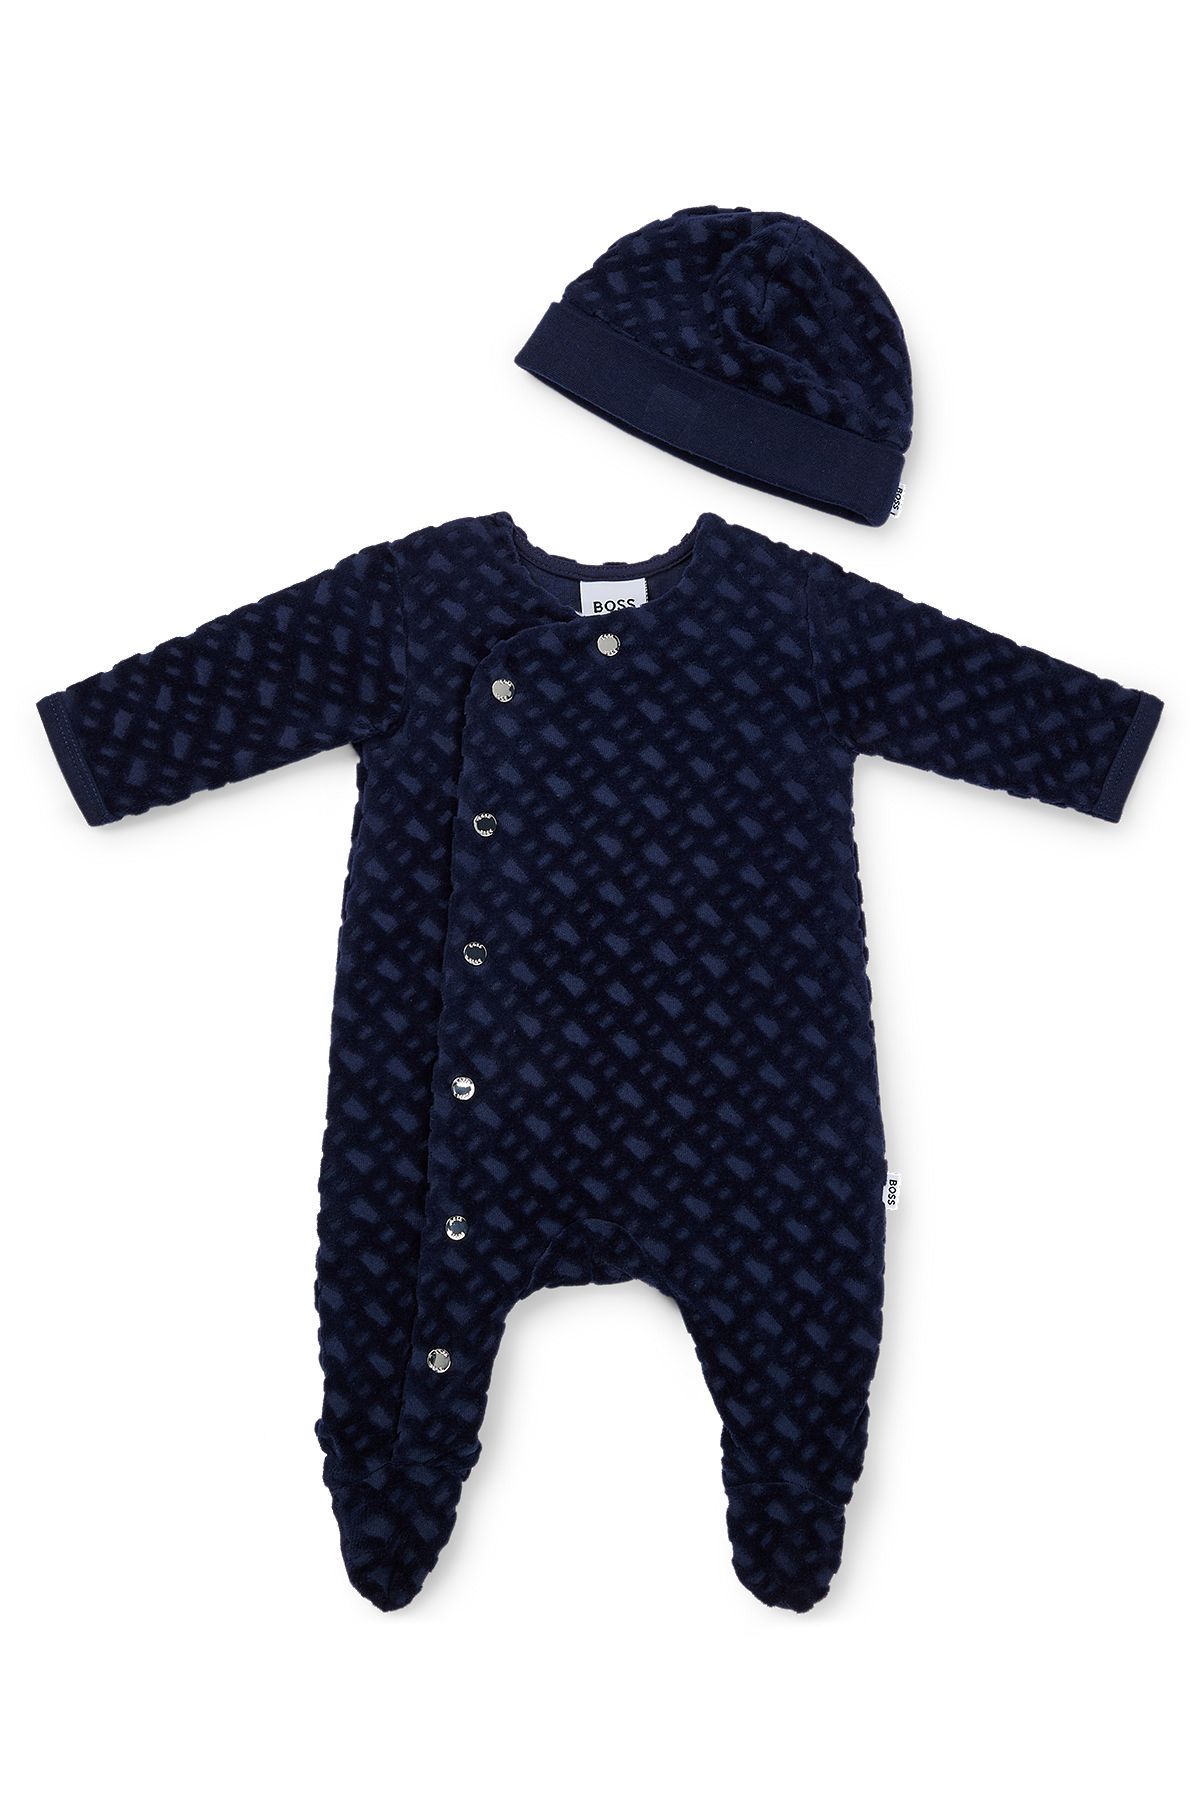 Gift-boxed monogrammed sleepsuit and hat set for babies, Dark Blue